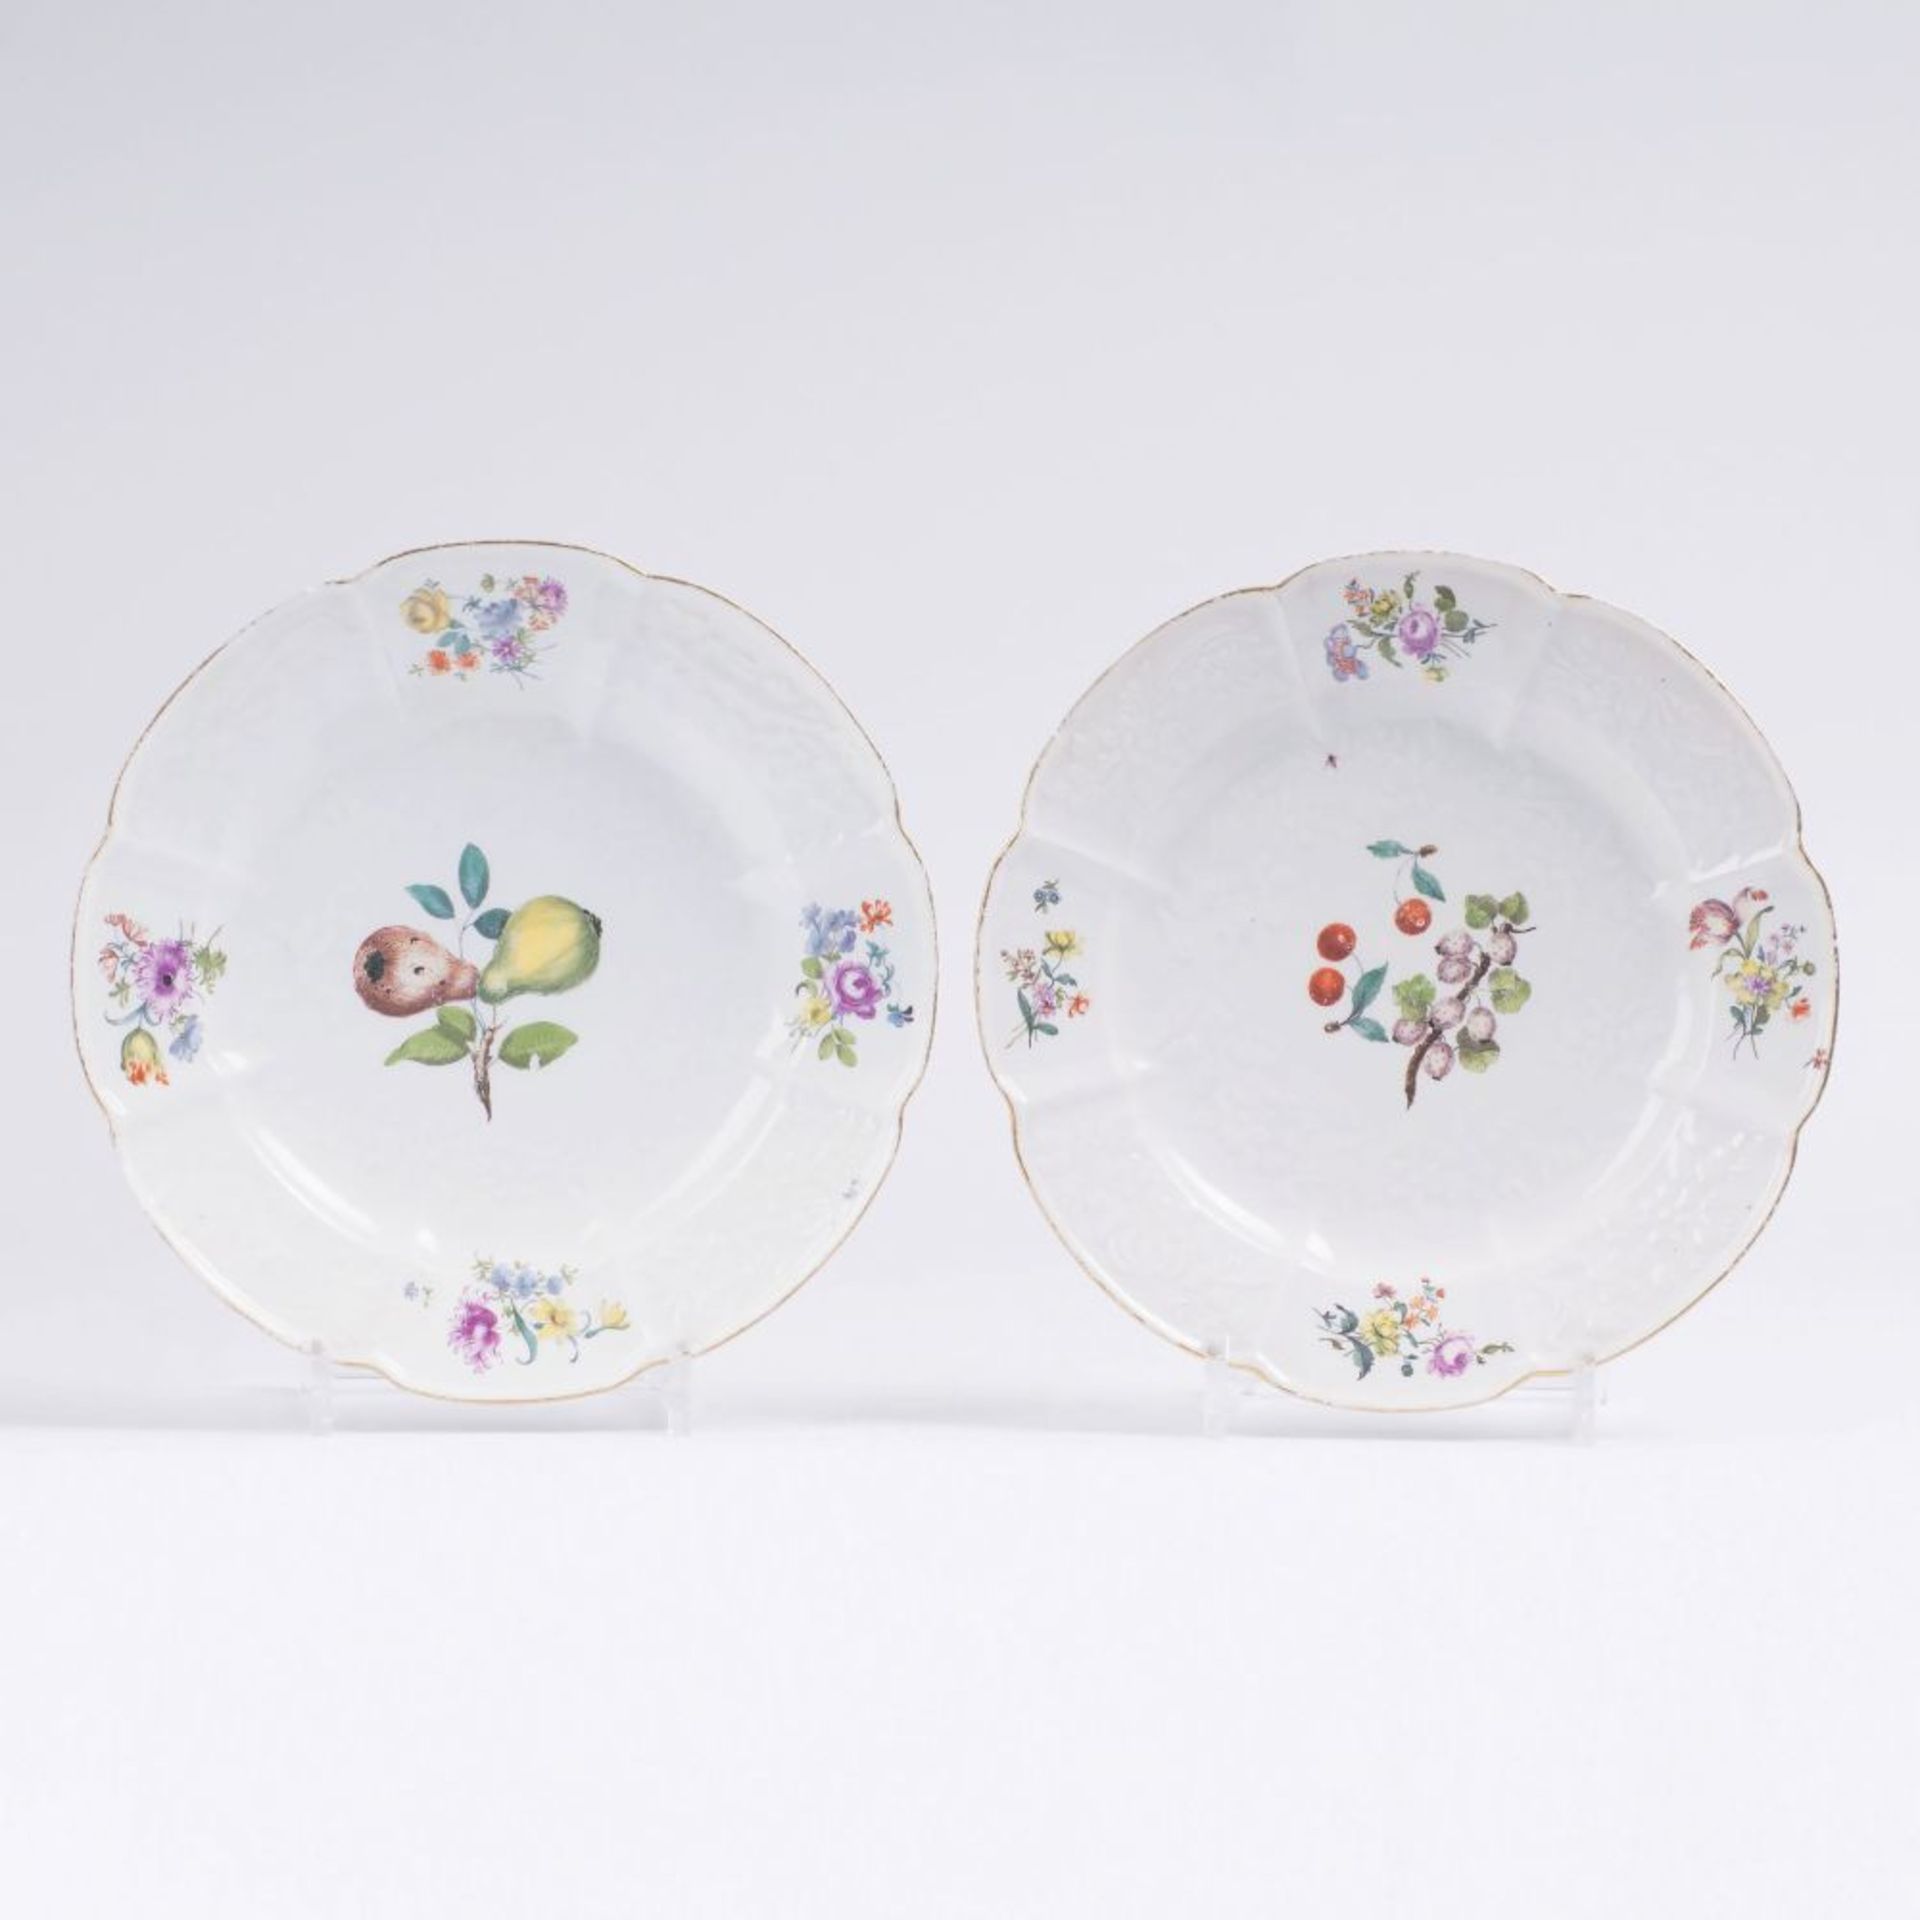 A Pair of Plates with Gotzkowsky Relief.